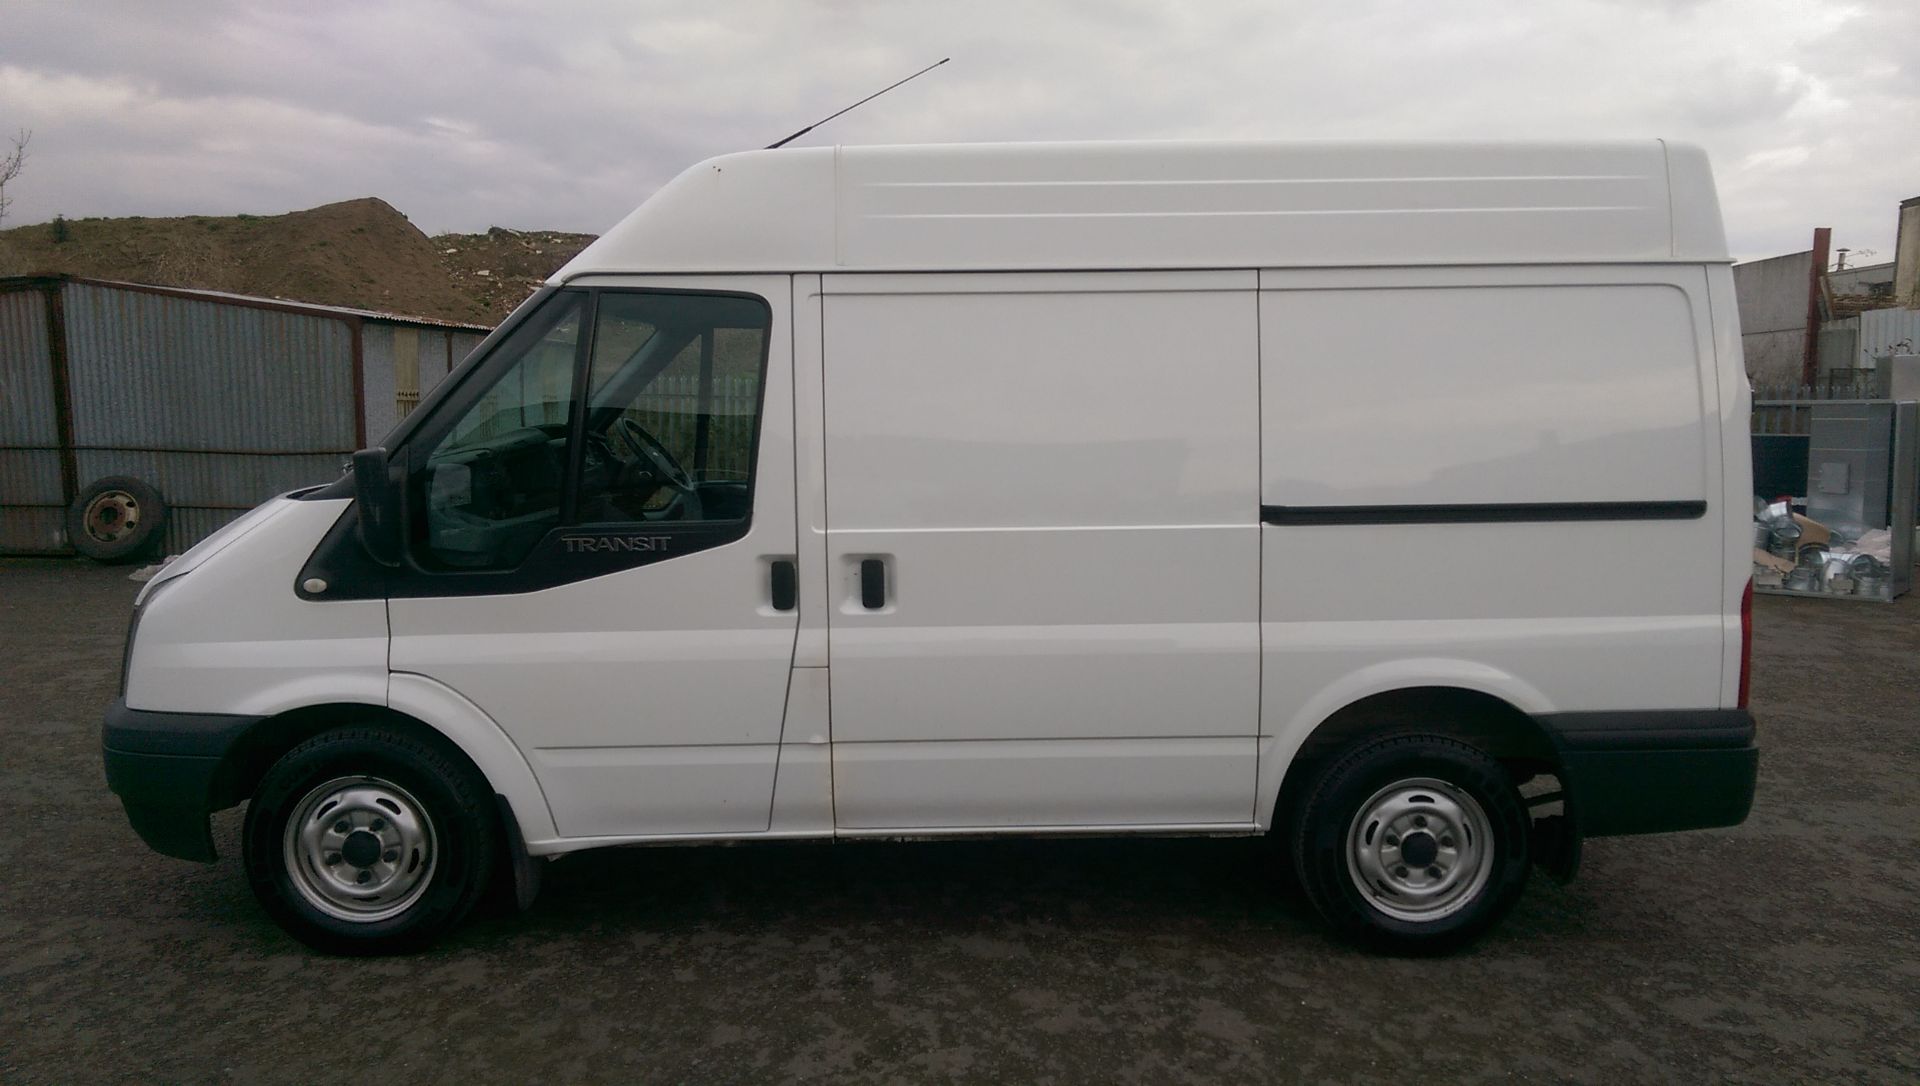 Ford Transit 125PS T260 FWD 78k miles FG63 OZF - Image 9 of 10